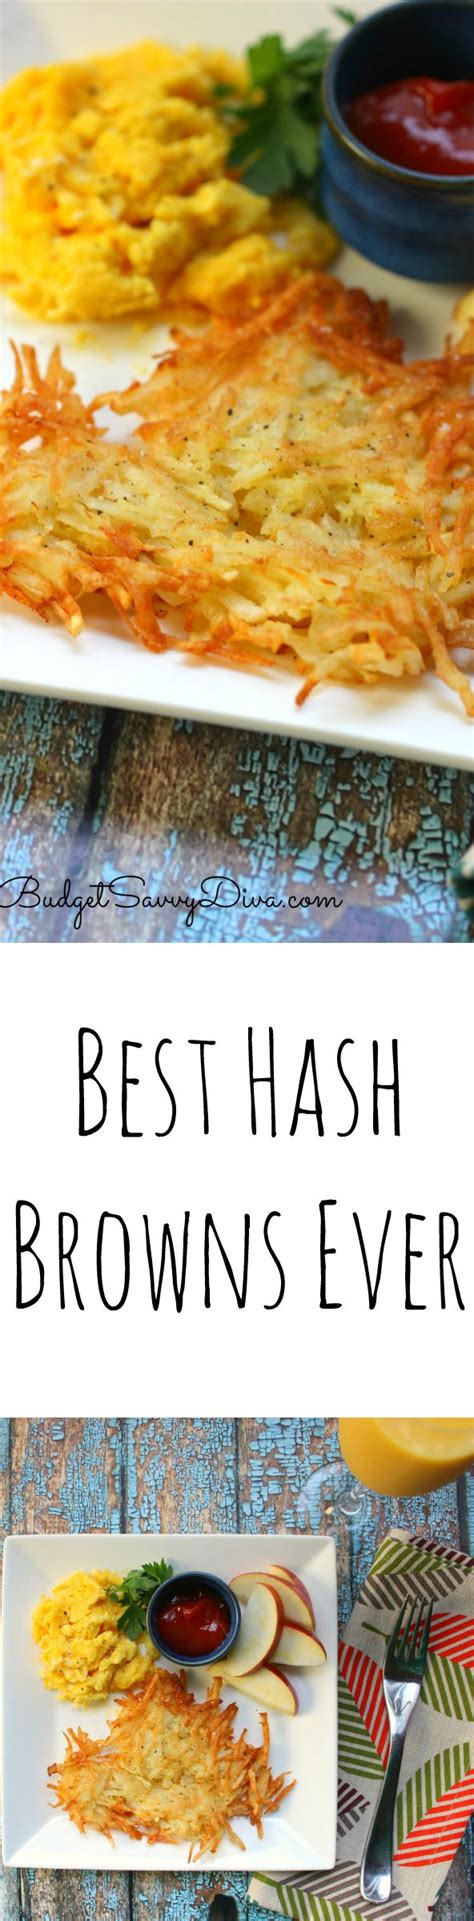 The Best Hash Browns Ever Recipe Budget Savvy Diva